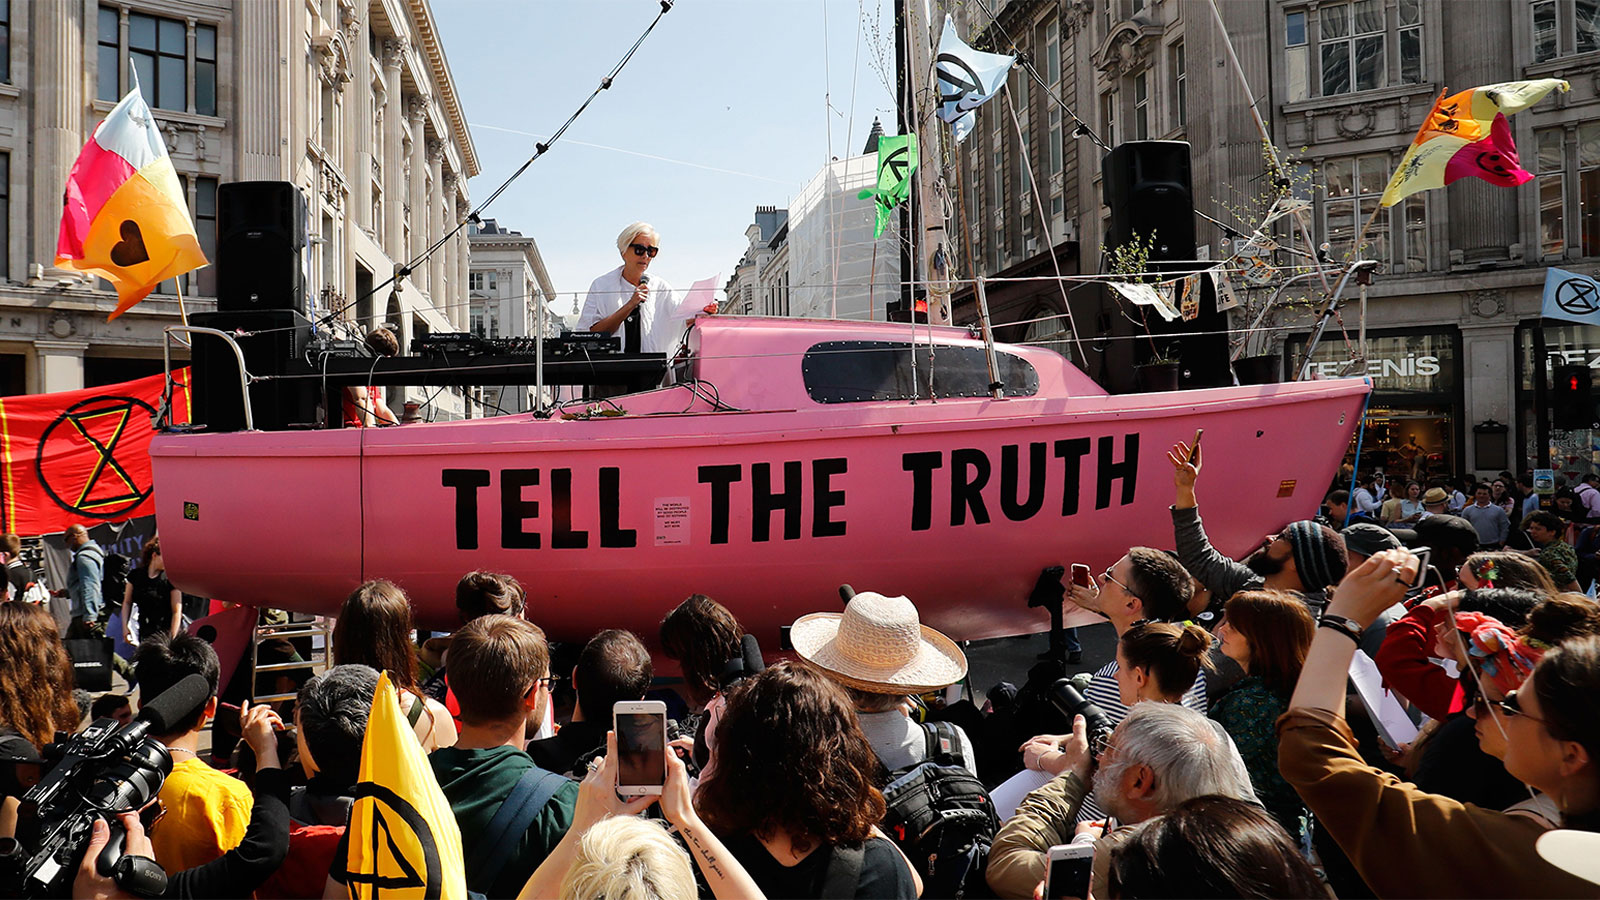 British actress Emma Thompson gives an address from the stage atop a pink boat during an Extinction Rebellion protest